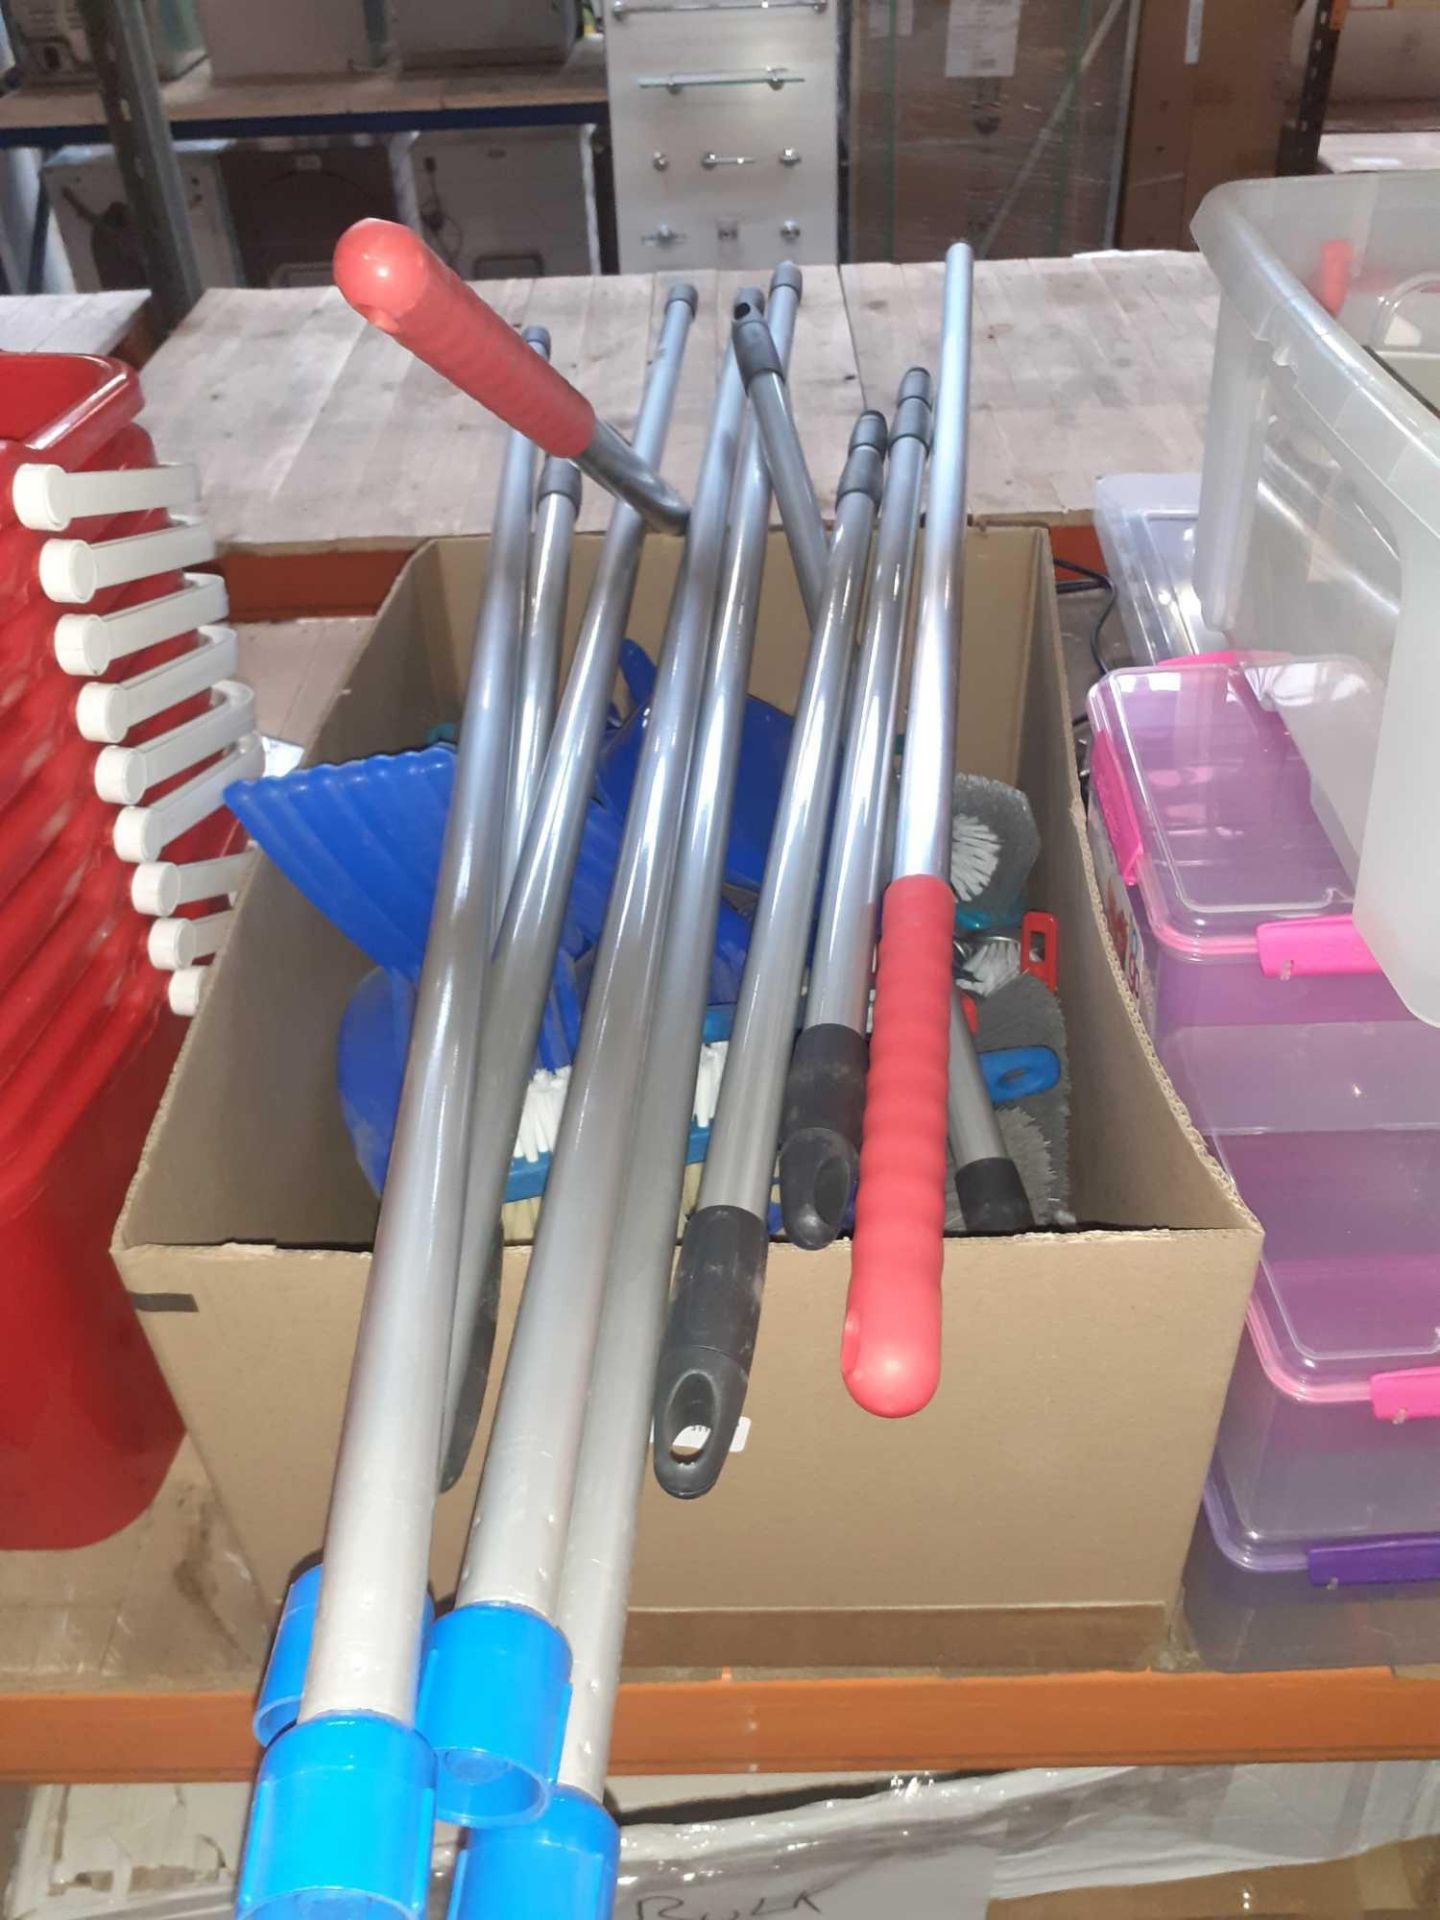 1 LOT TO CONTAIN 1 BOX OF ASSORTED BRUSH HANDLES AND BRUSH HEADS AND 9 PLASTIC MOP BUCKETS